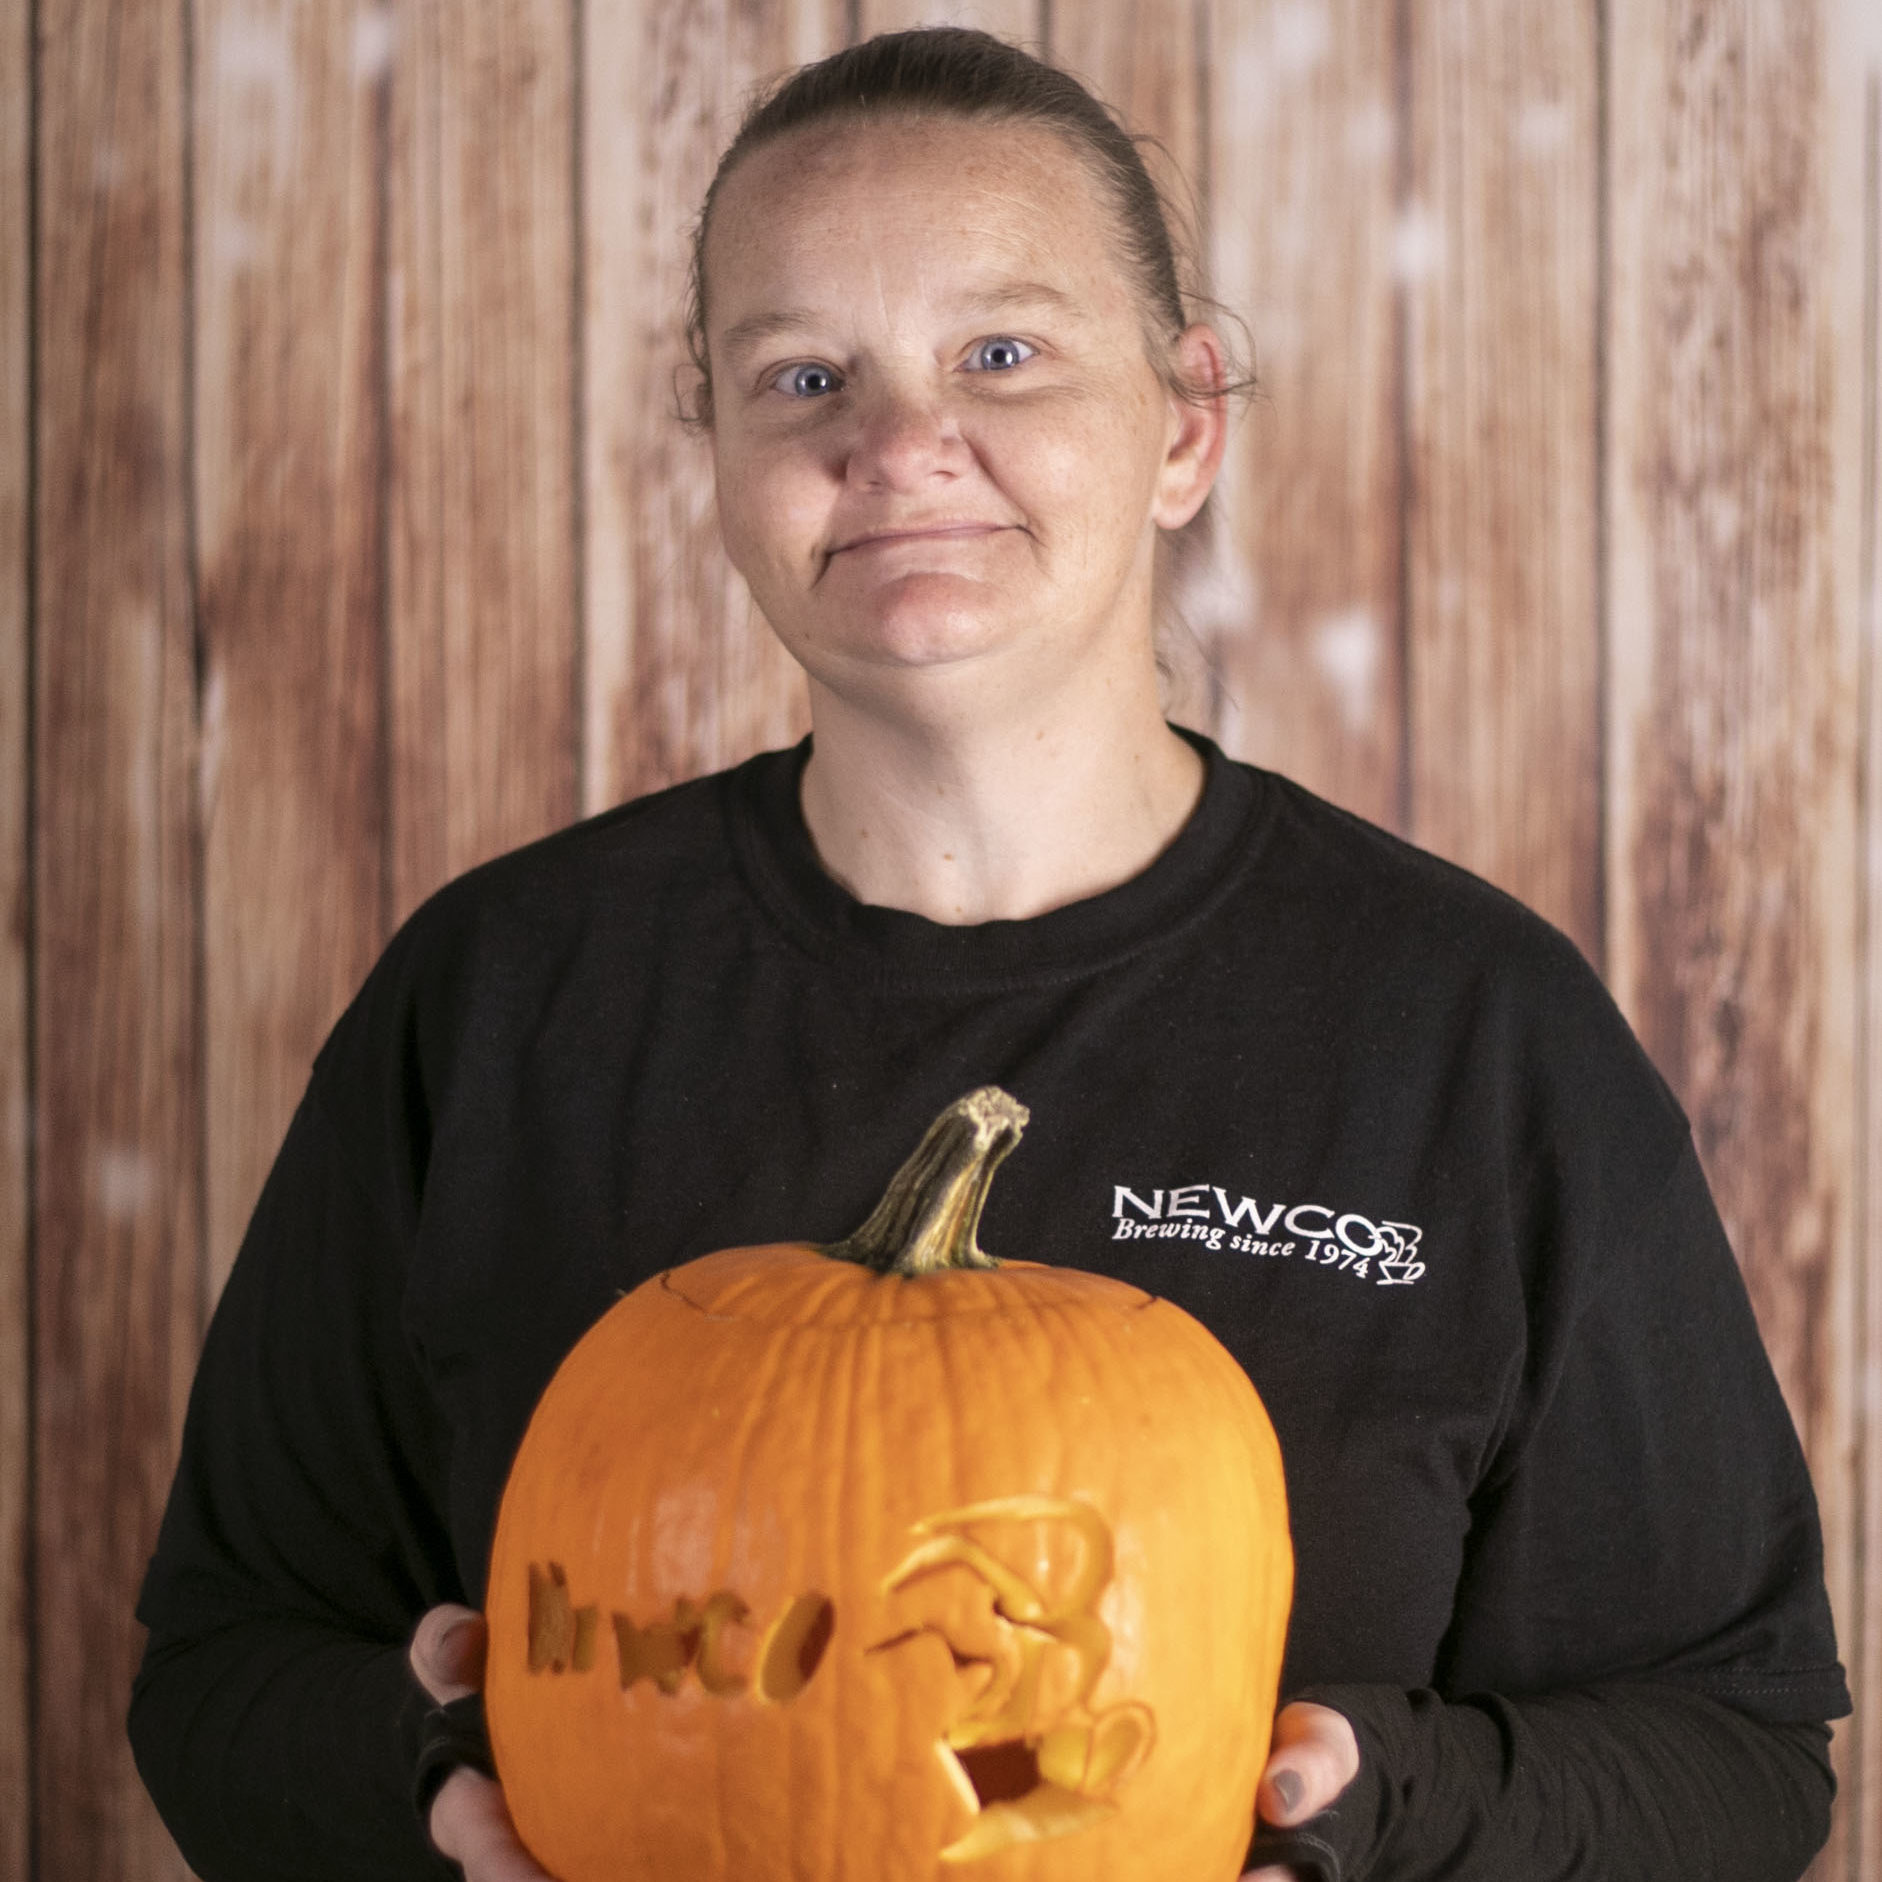 Newco Halloween 2019 third place winner of pumpkin carving contest